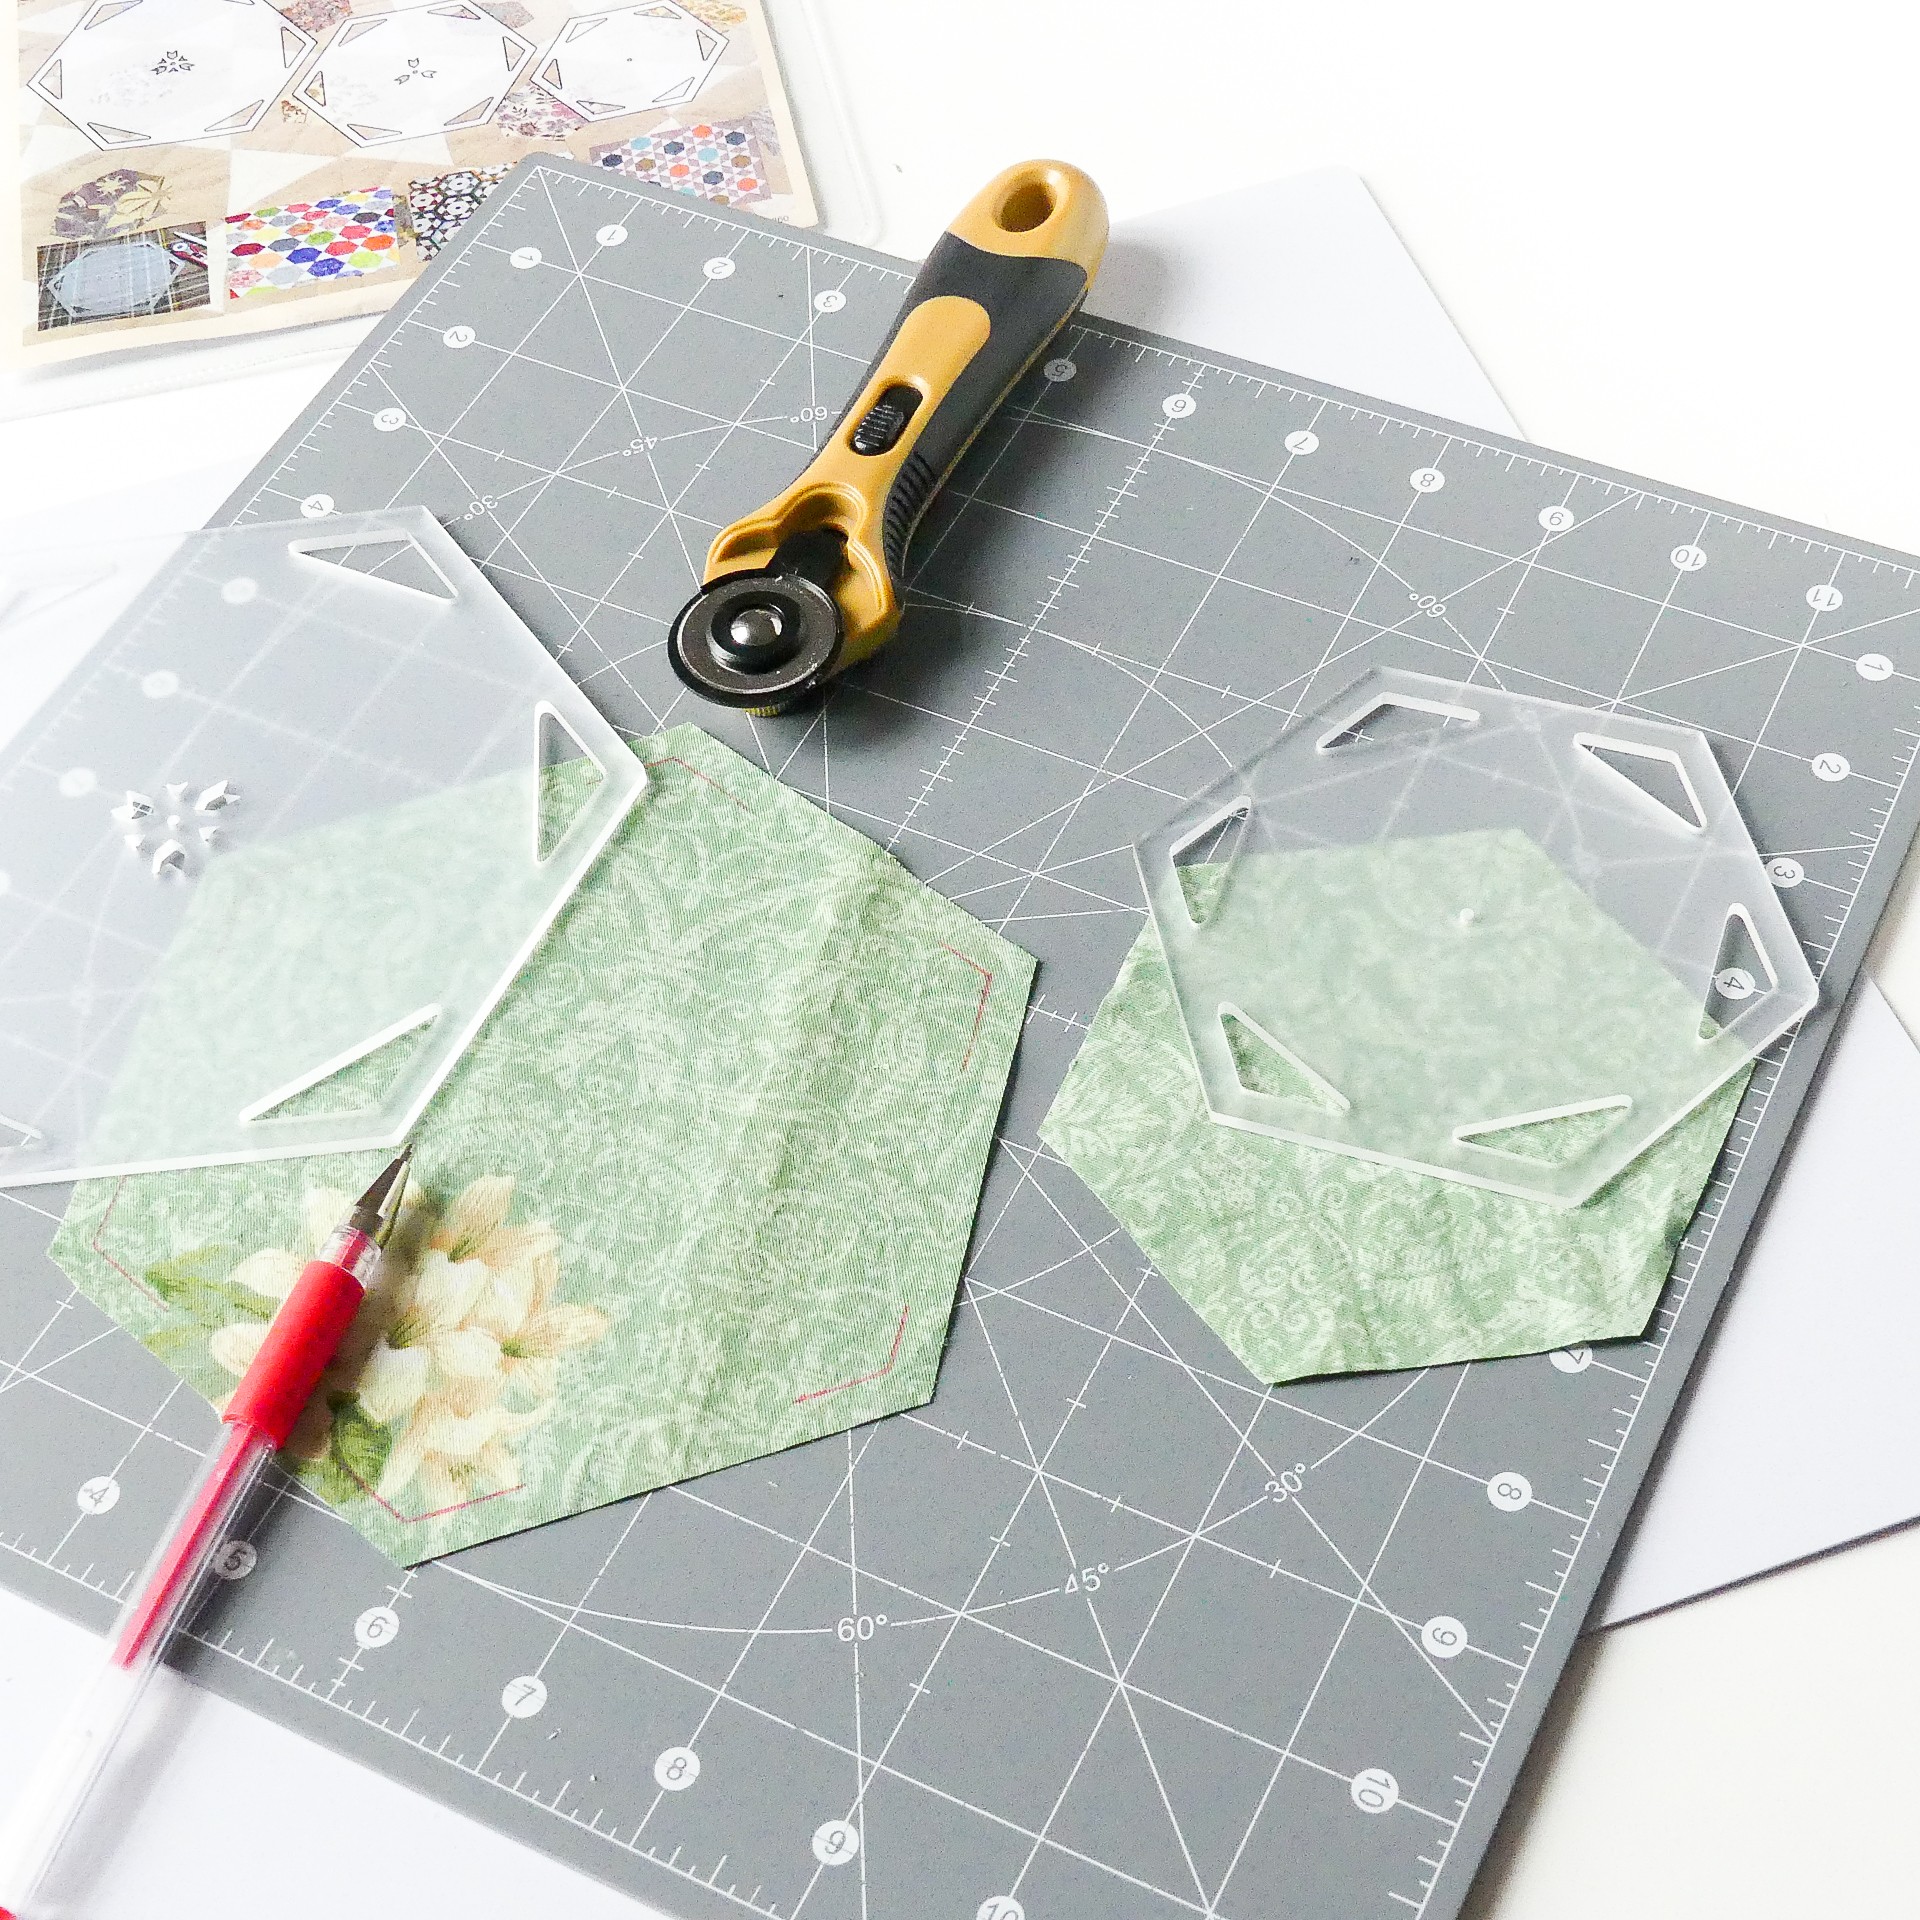 Showing marked lines after using the triangular seam allowance slots in hexagon quilt templates.